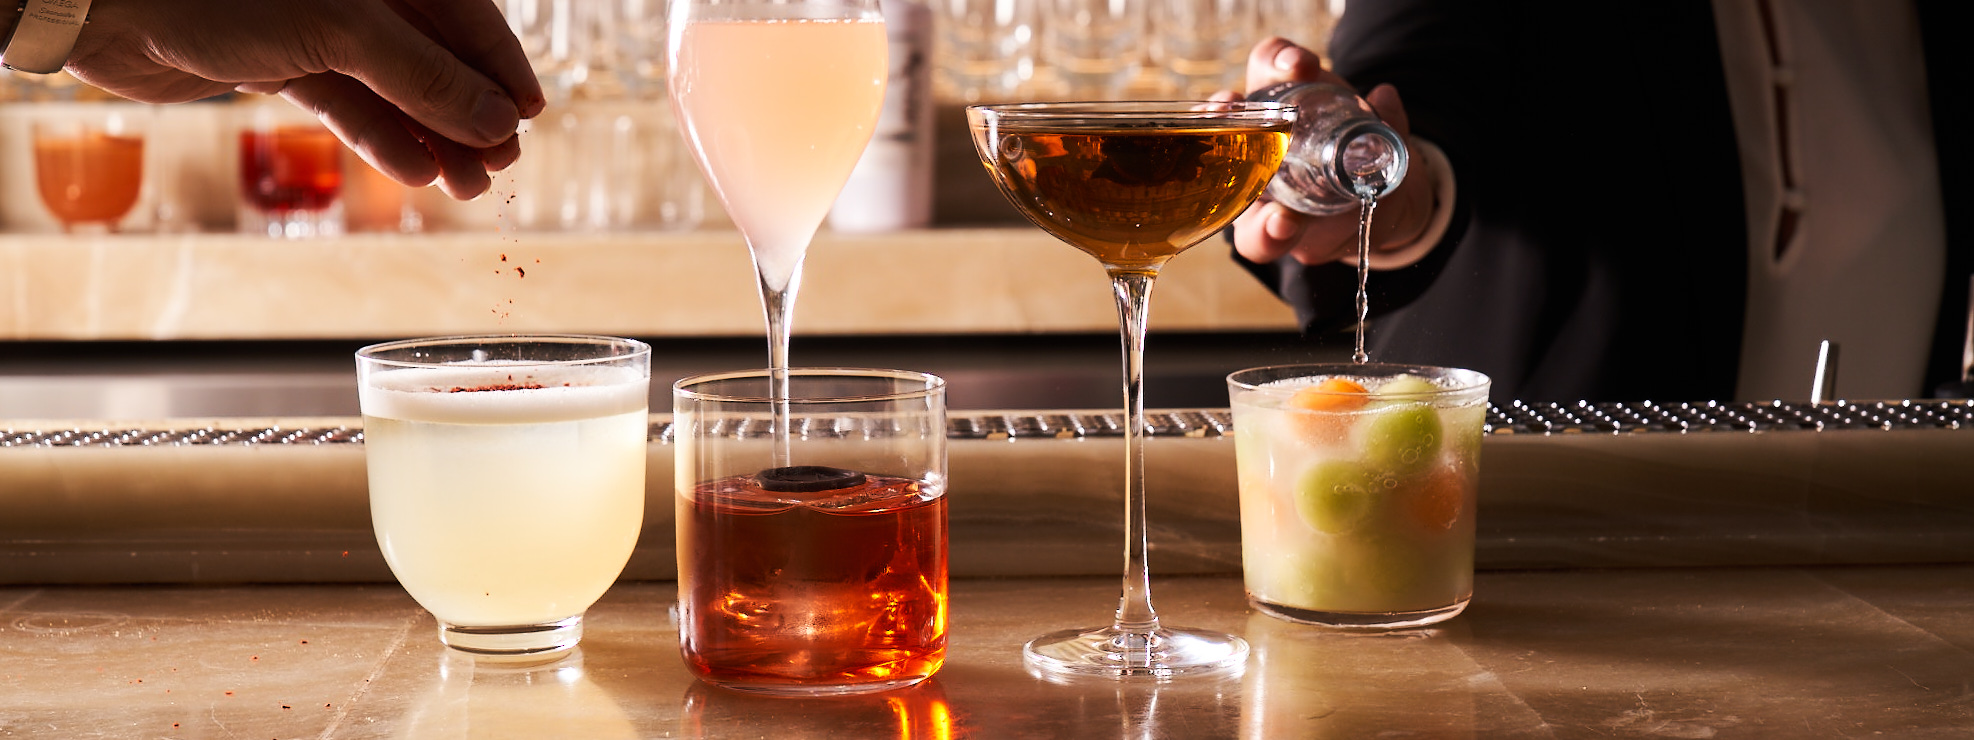 Five cocktails lined up on a bar with two hands in the shot pouring and garnishing